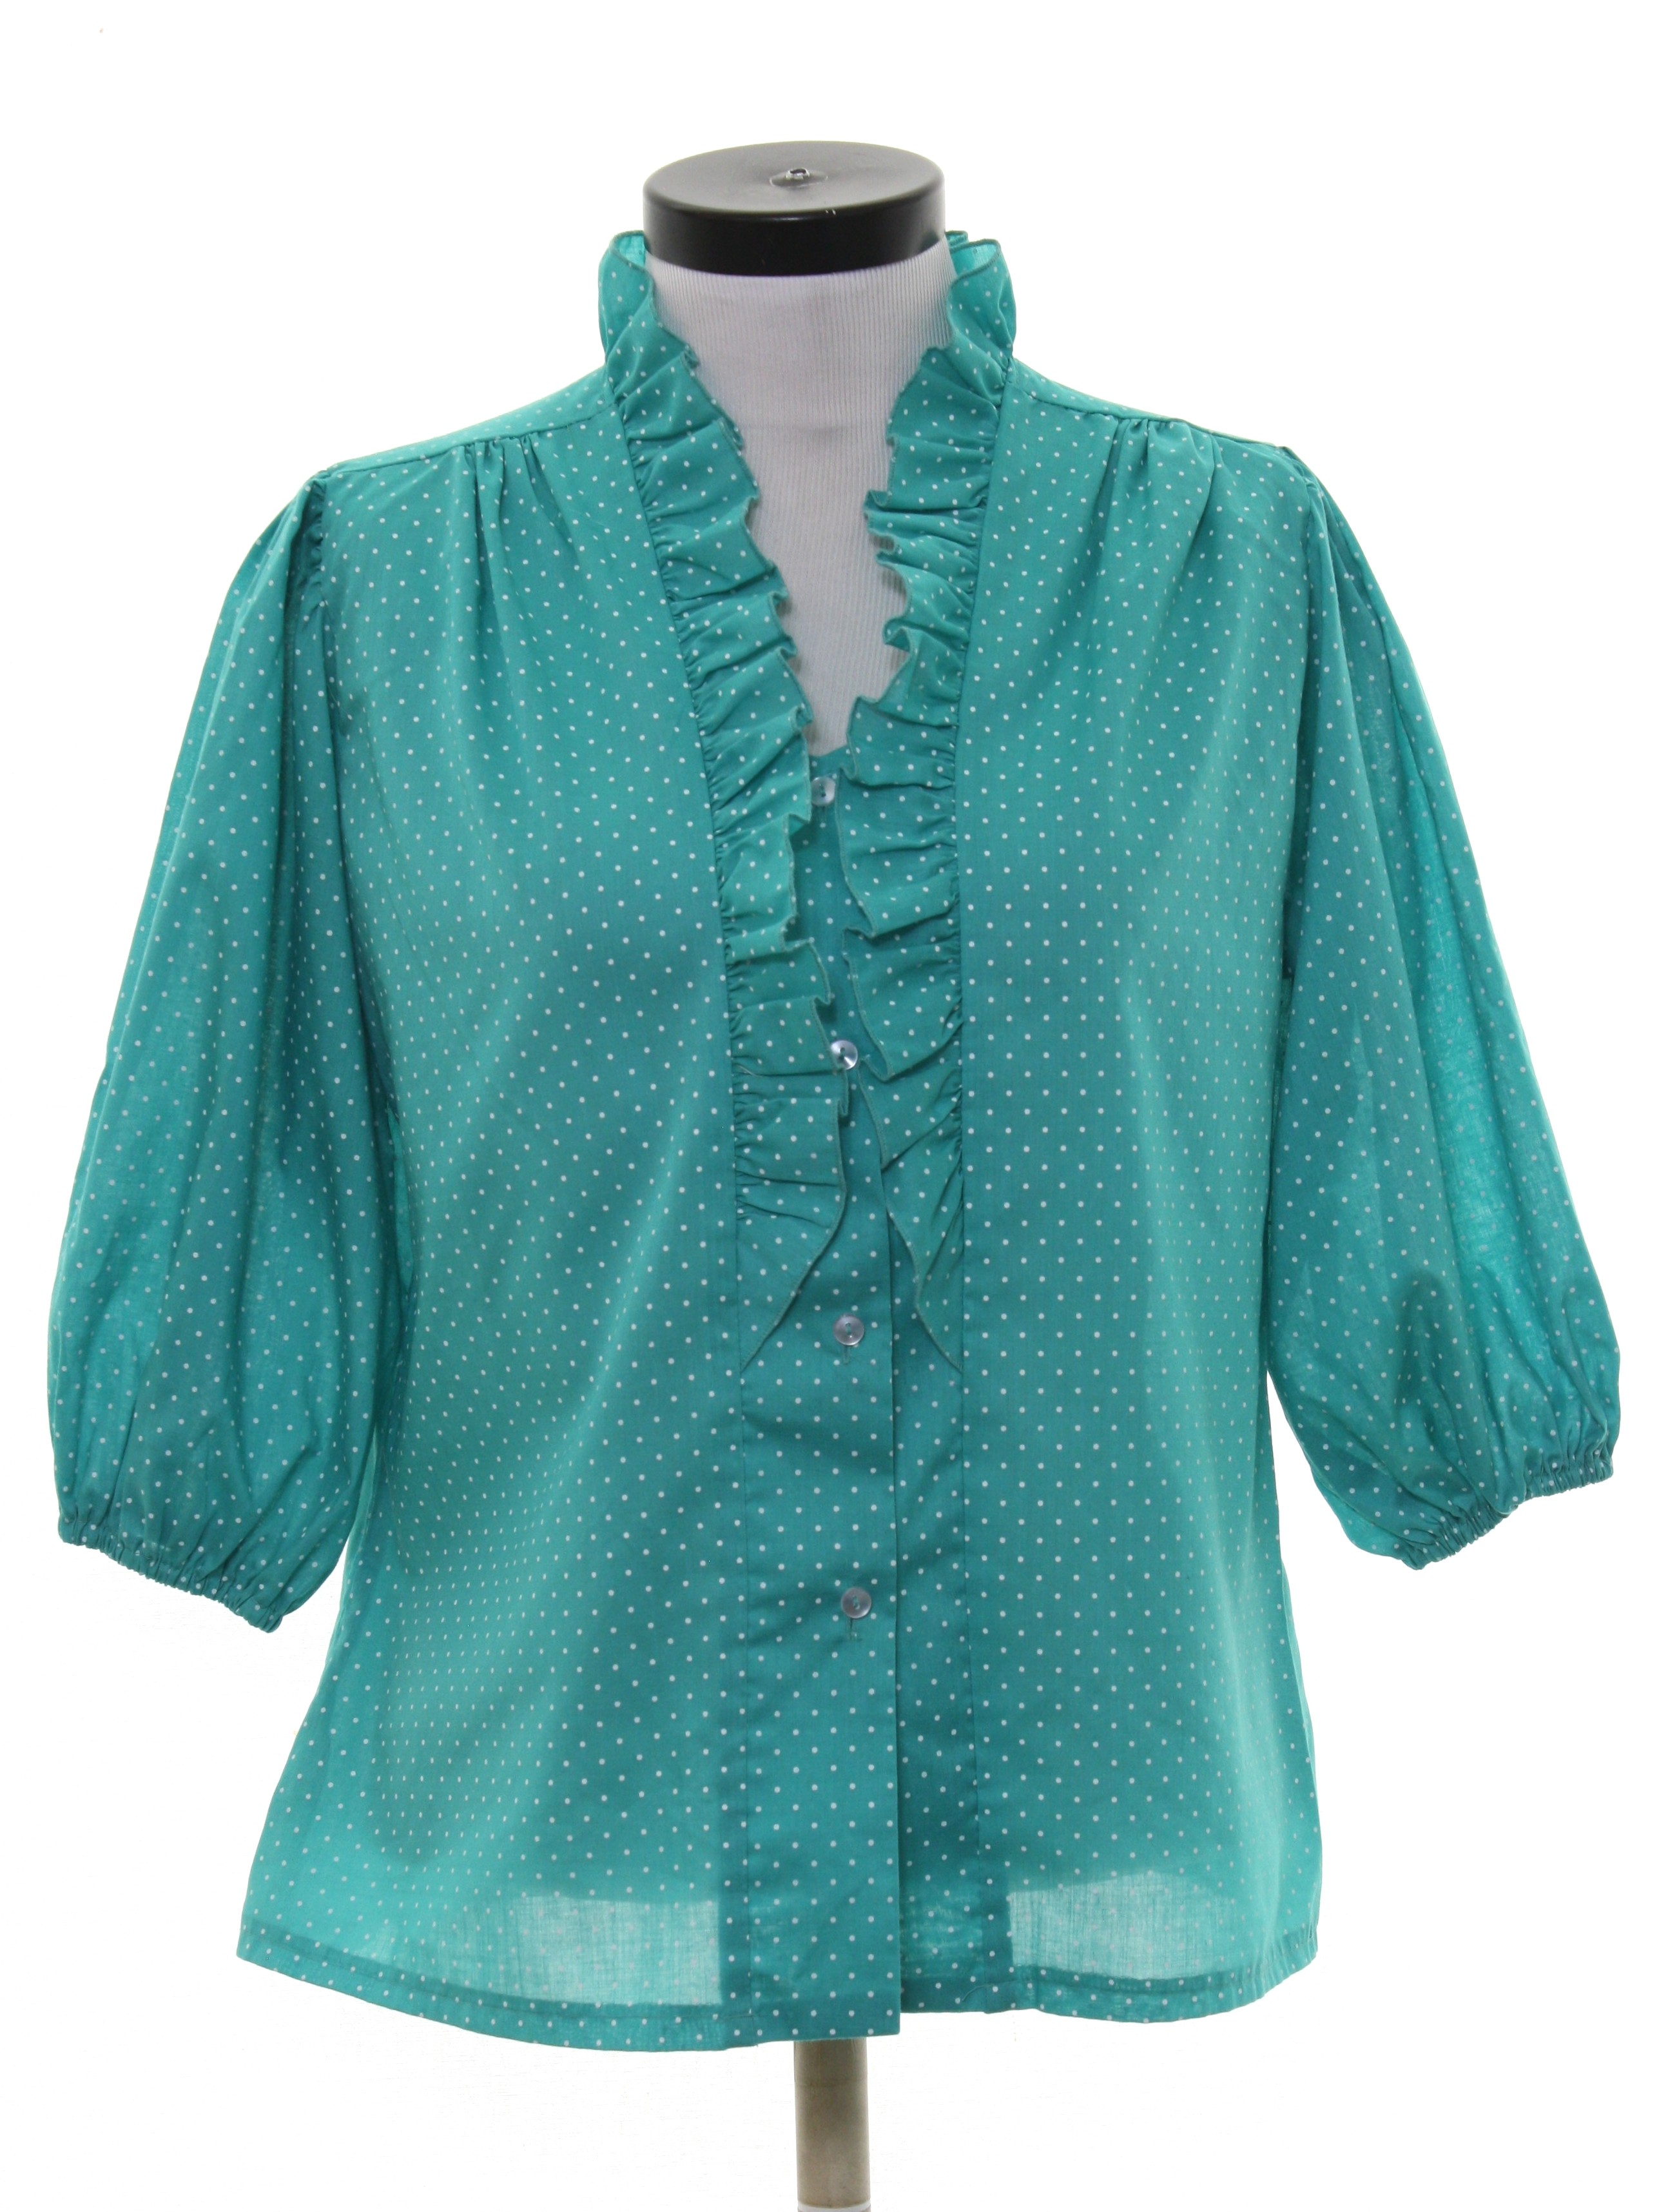 Retro 1980's Shirt: 80s -No Label- Womens teal and white polyester ...